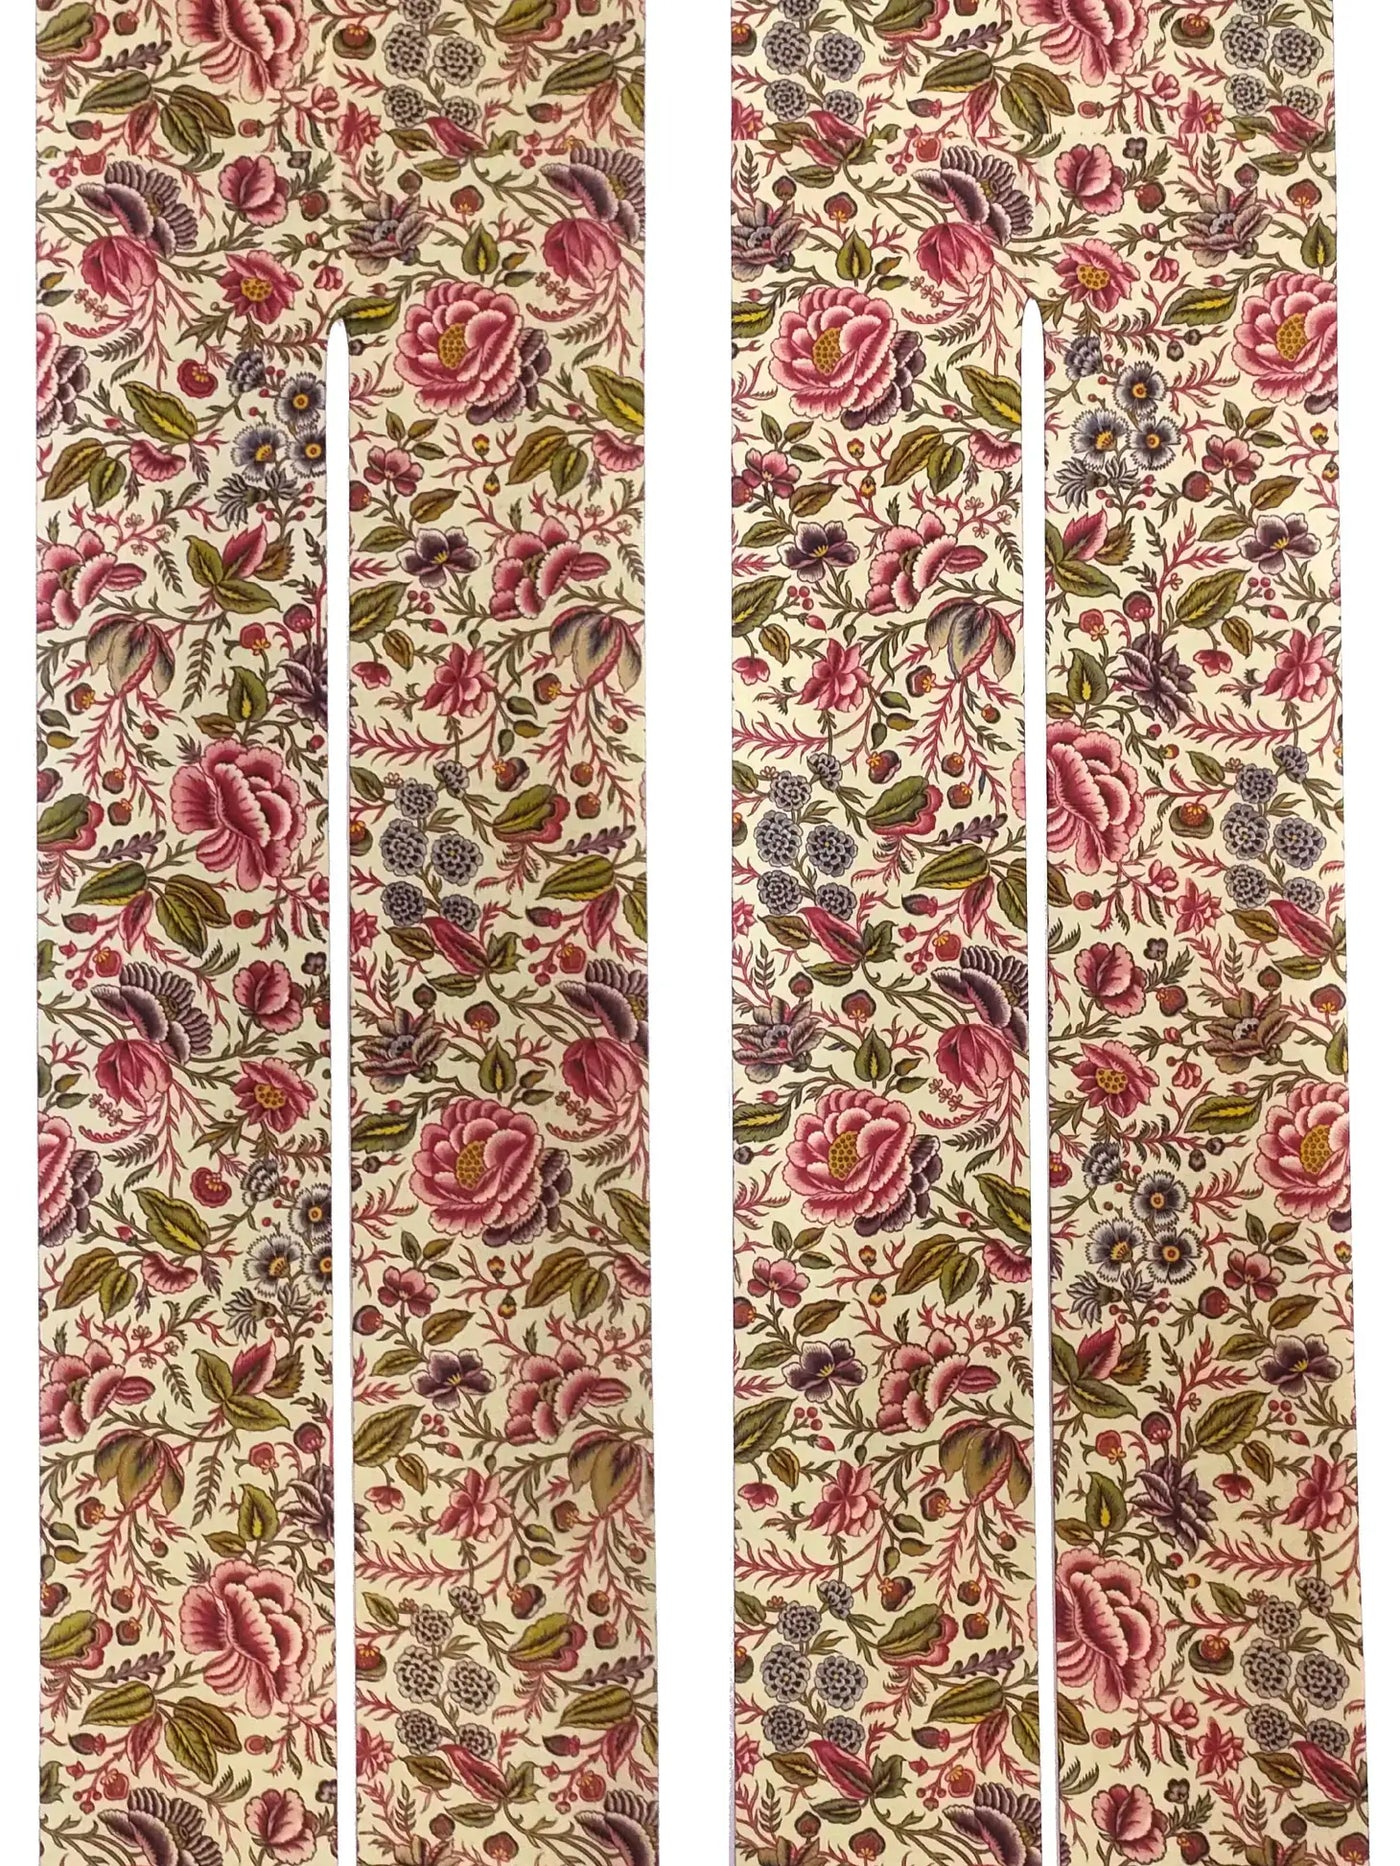 Rose Flower I | Smithsonian Museum | Printed Tights